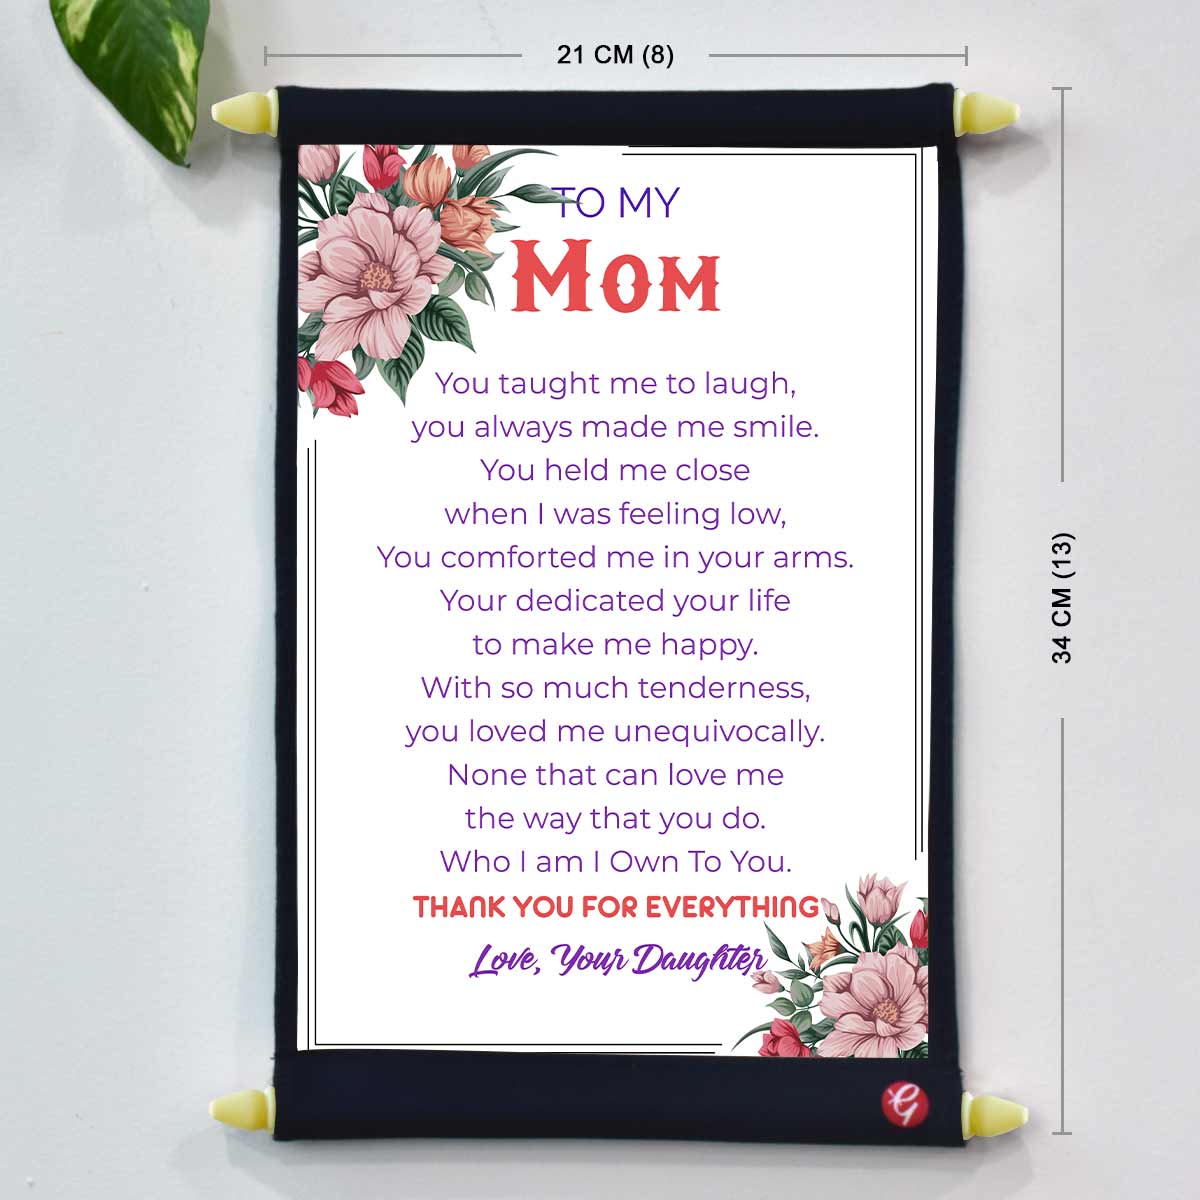 To my Mom Letter Scroll-5